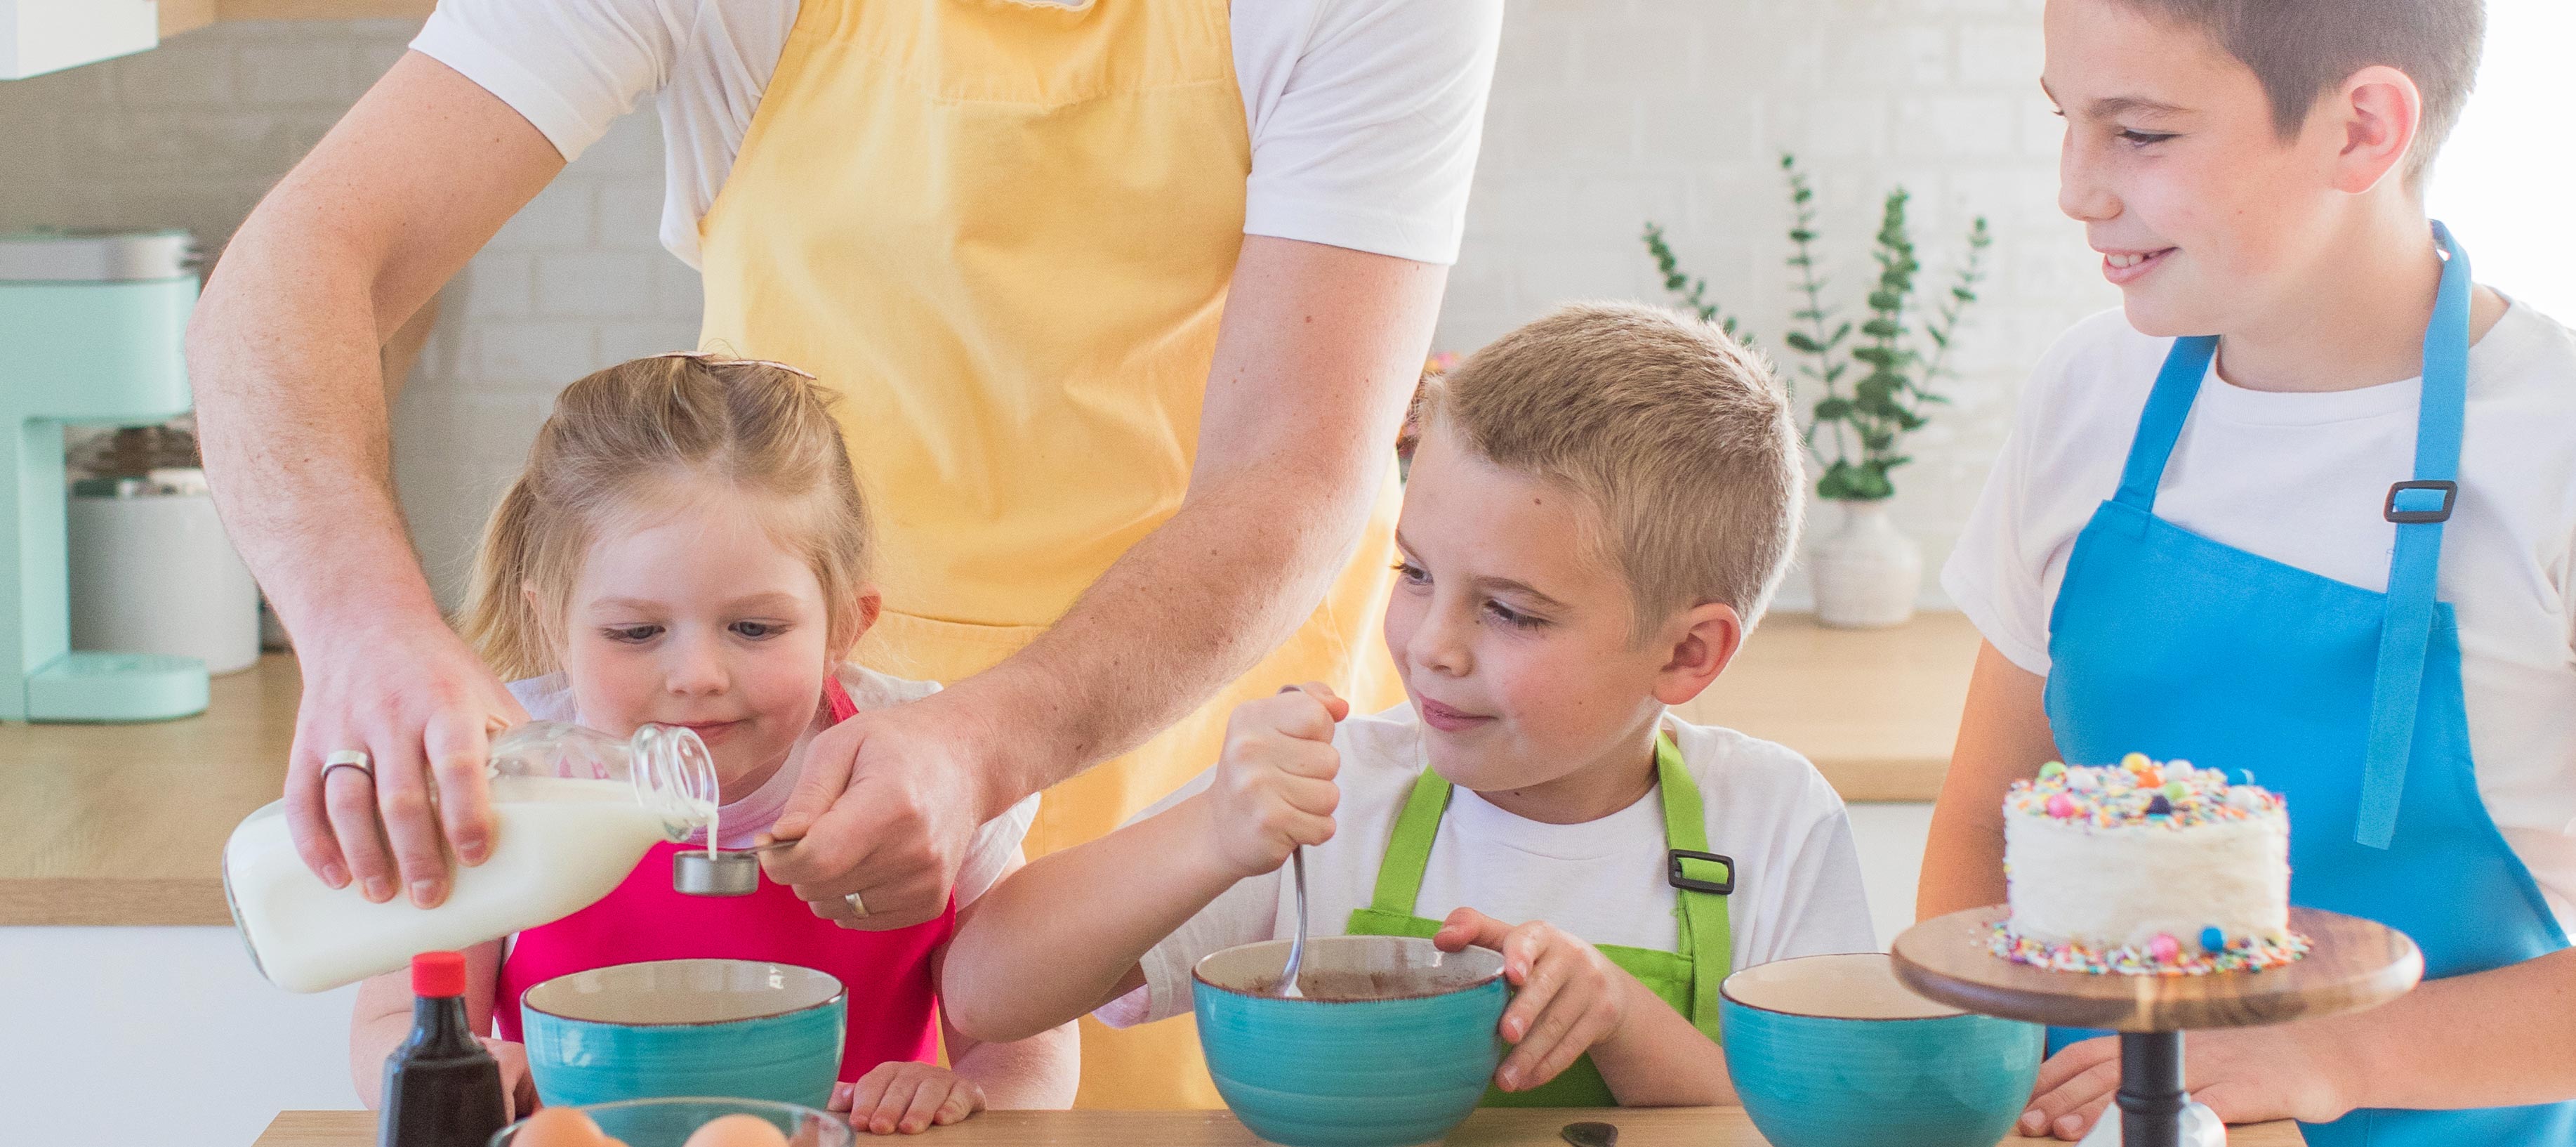 Explore Our Baking Kits for Kids